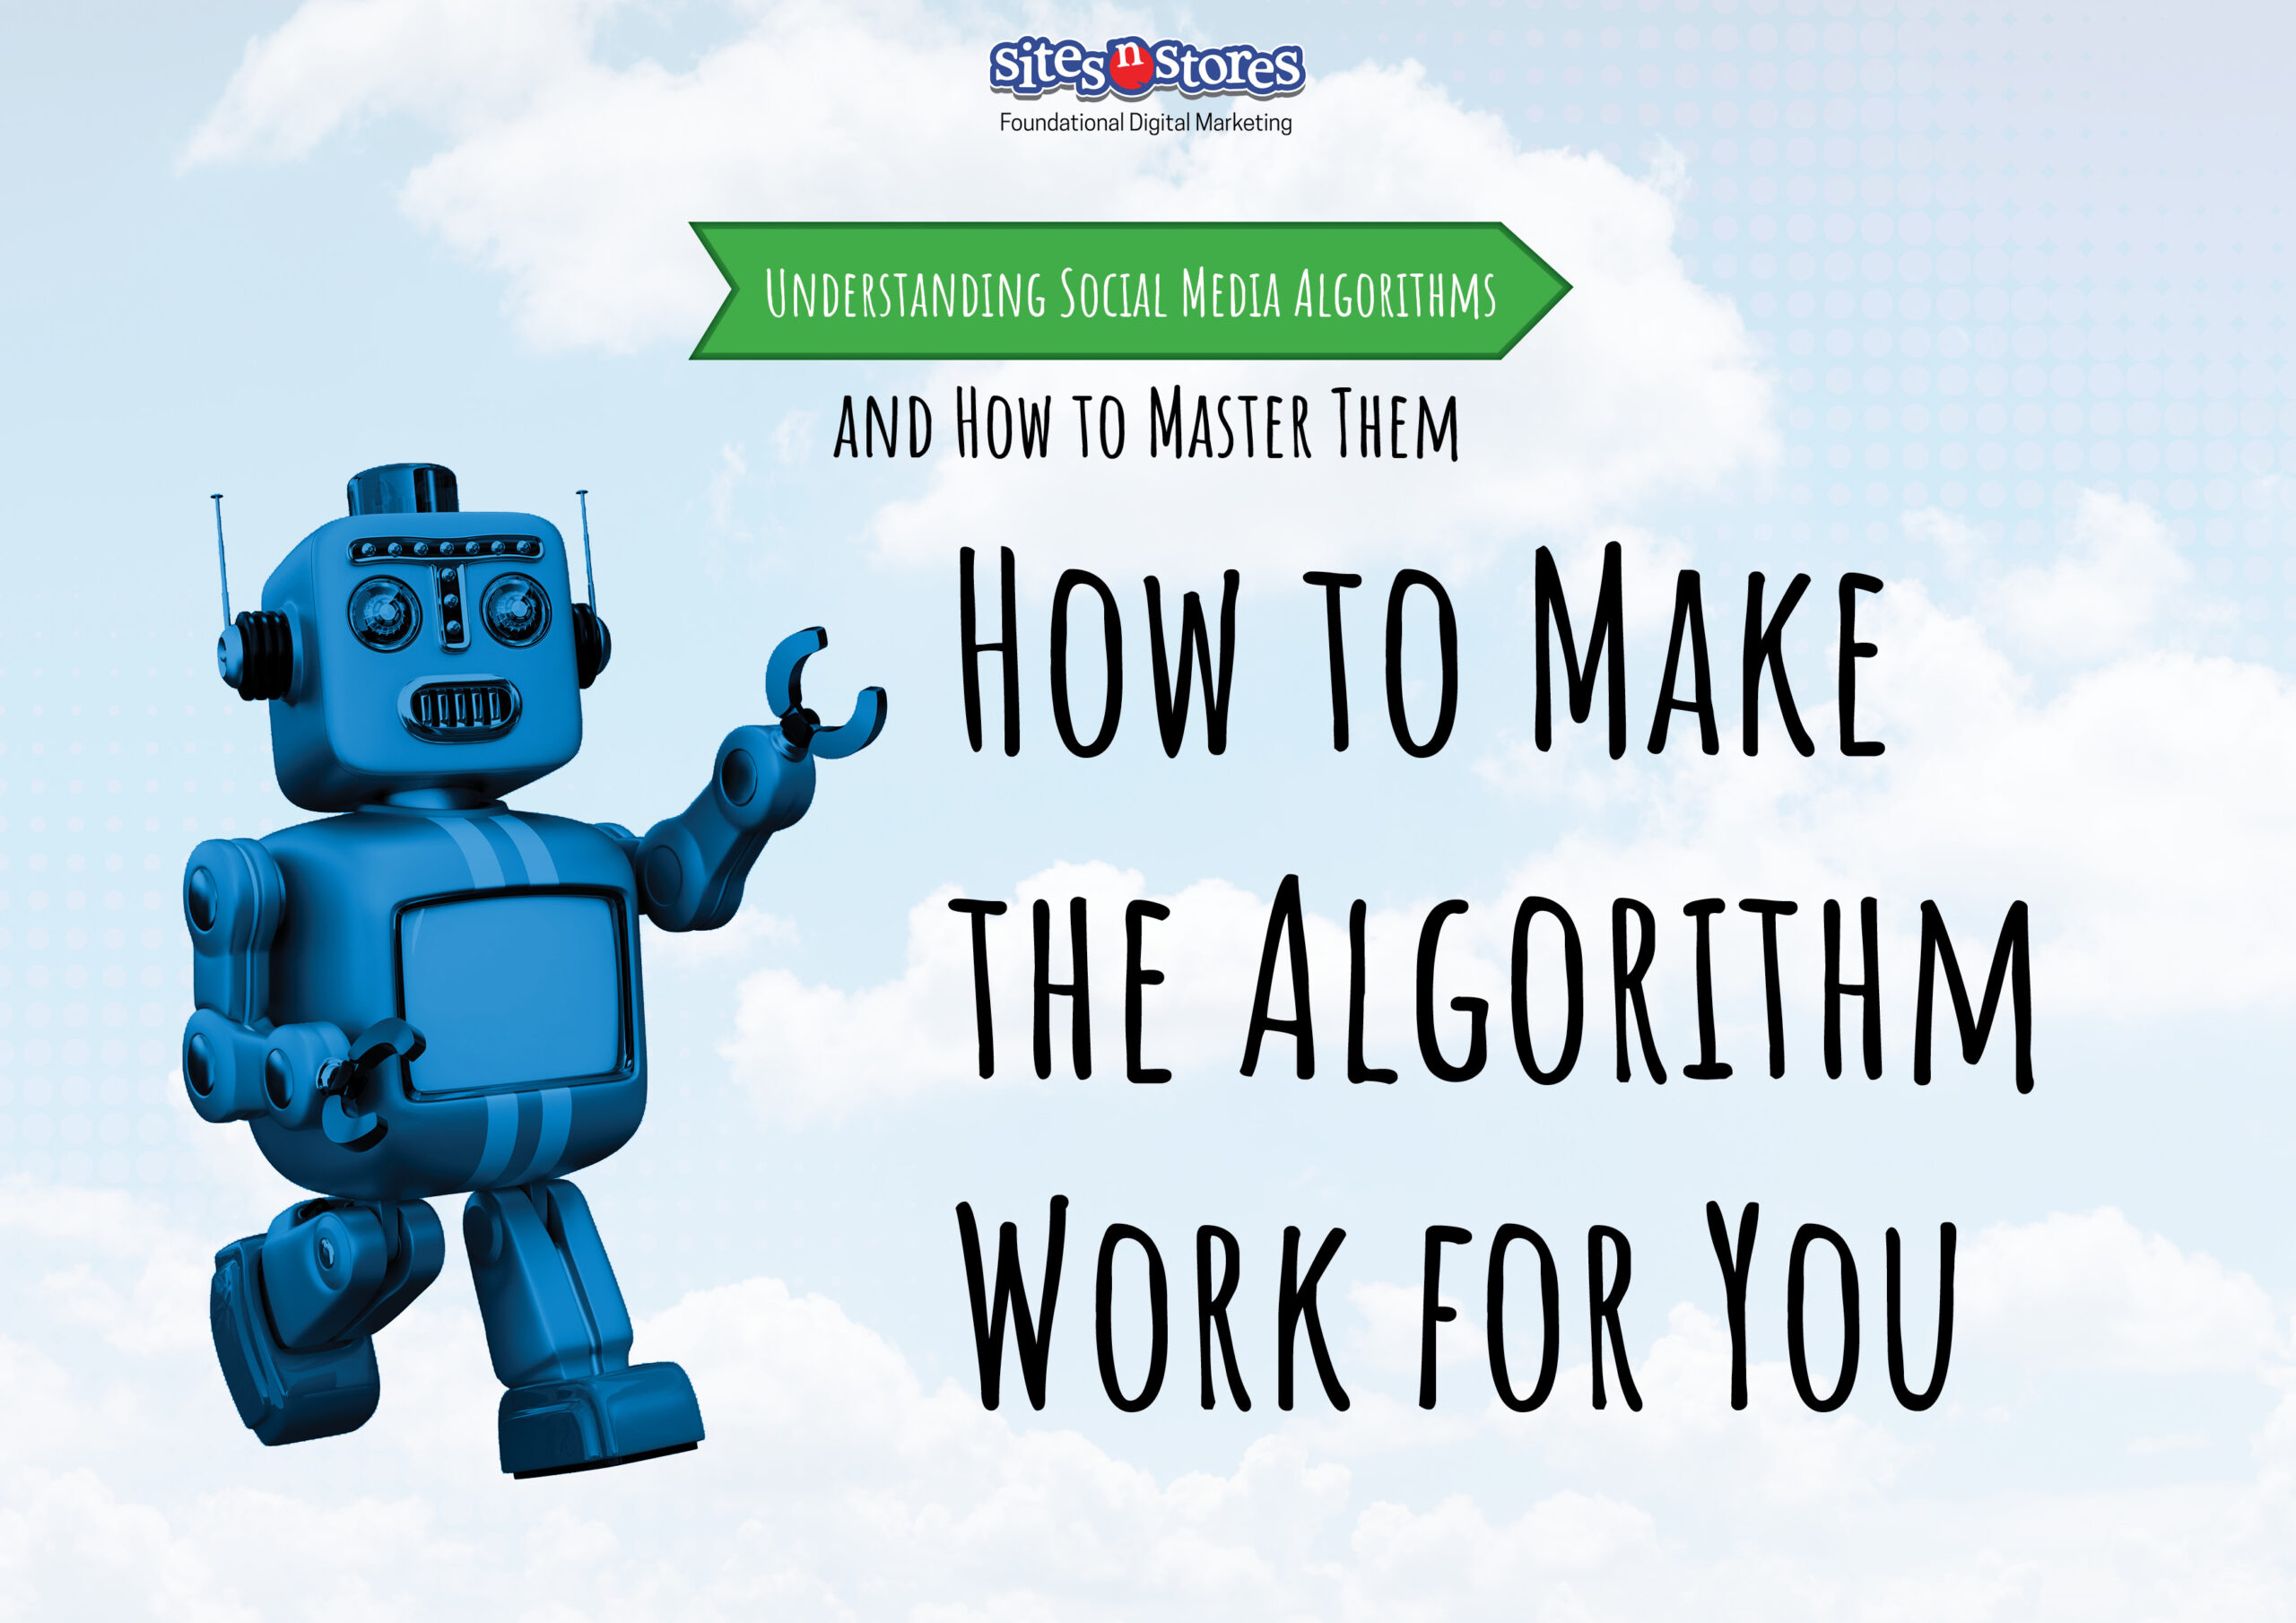 How to Make the Algorithm Work for You